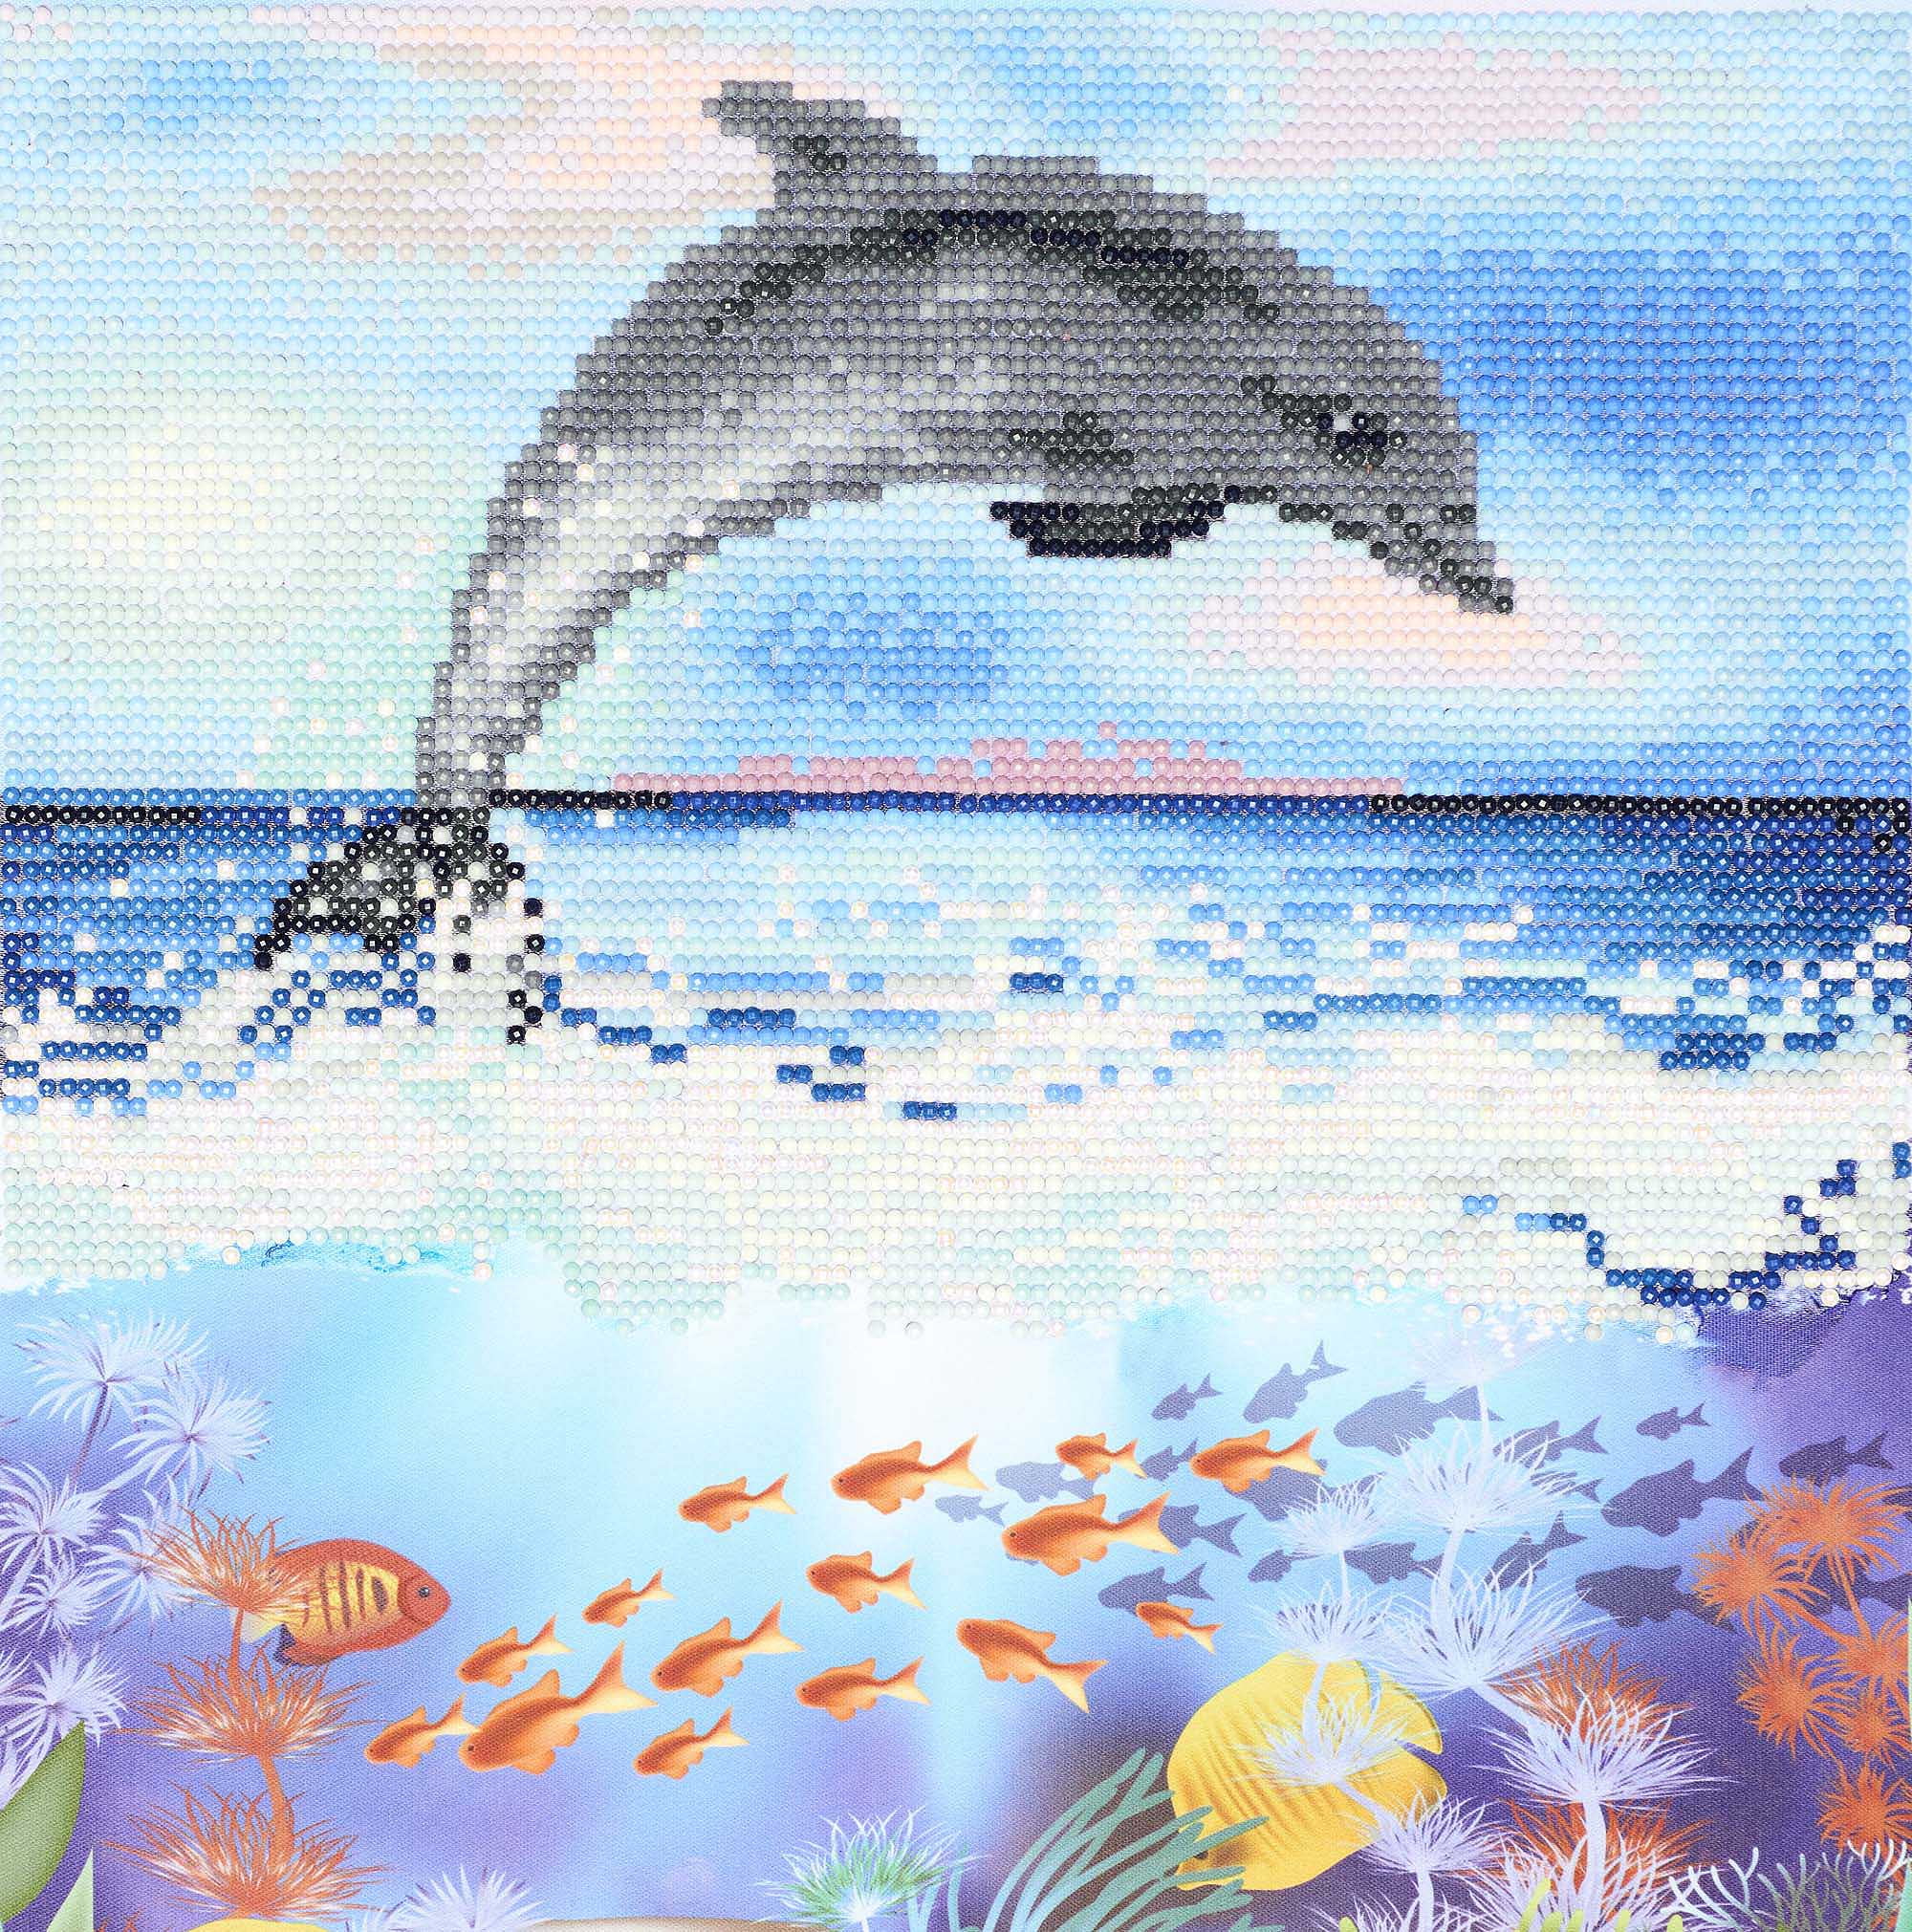 Sea Dolphins and Fish 5D Diamond Painting 